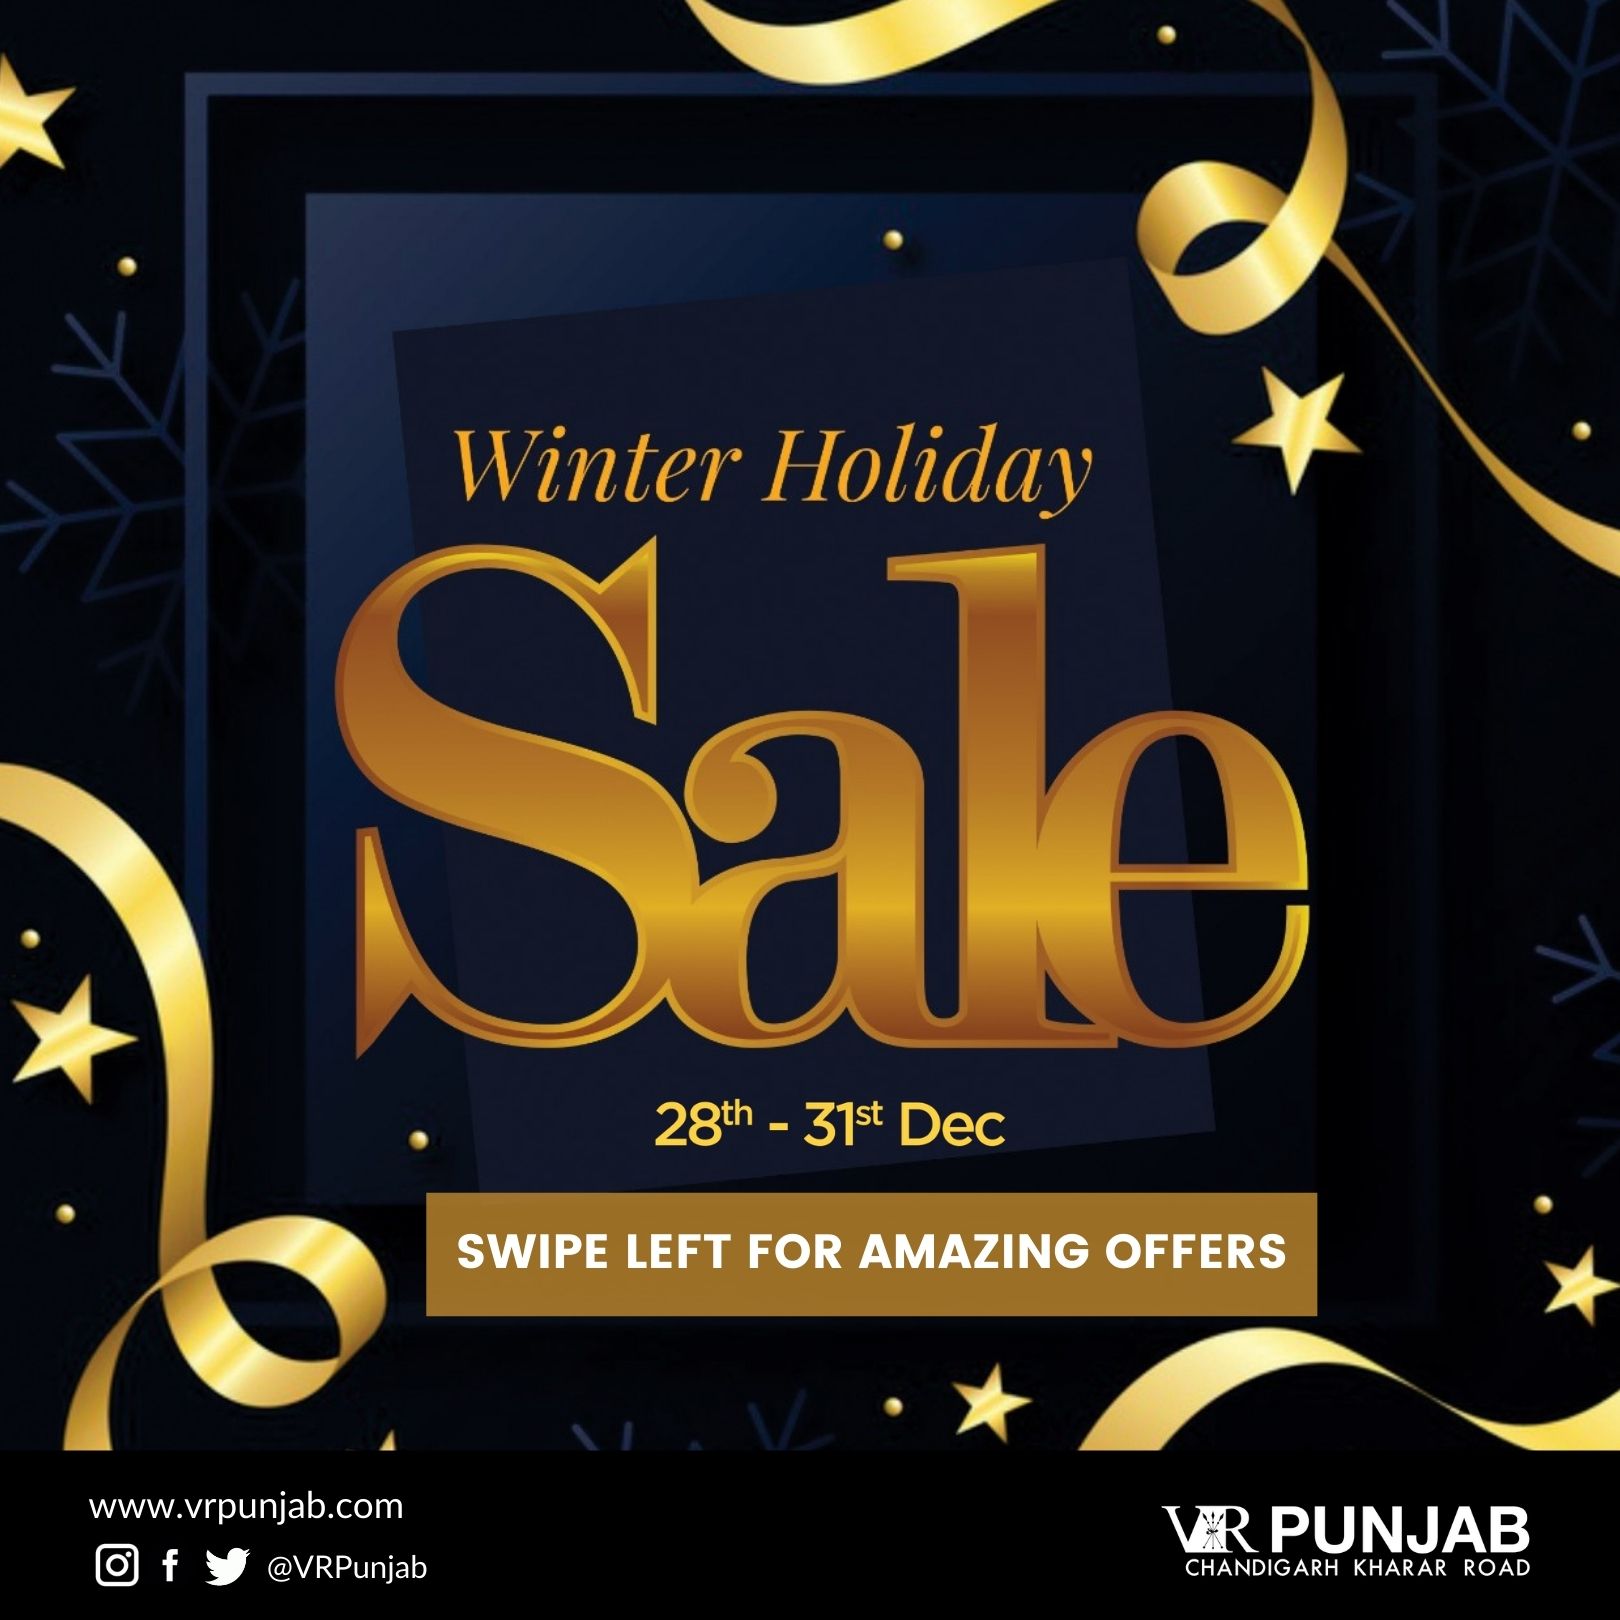 Winter Holiday Sale